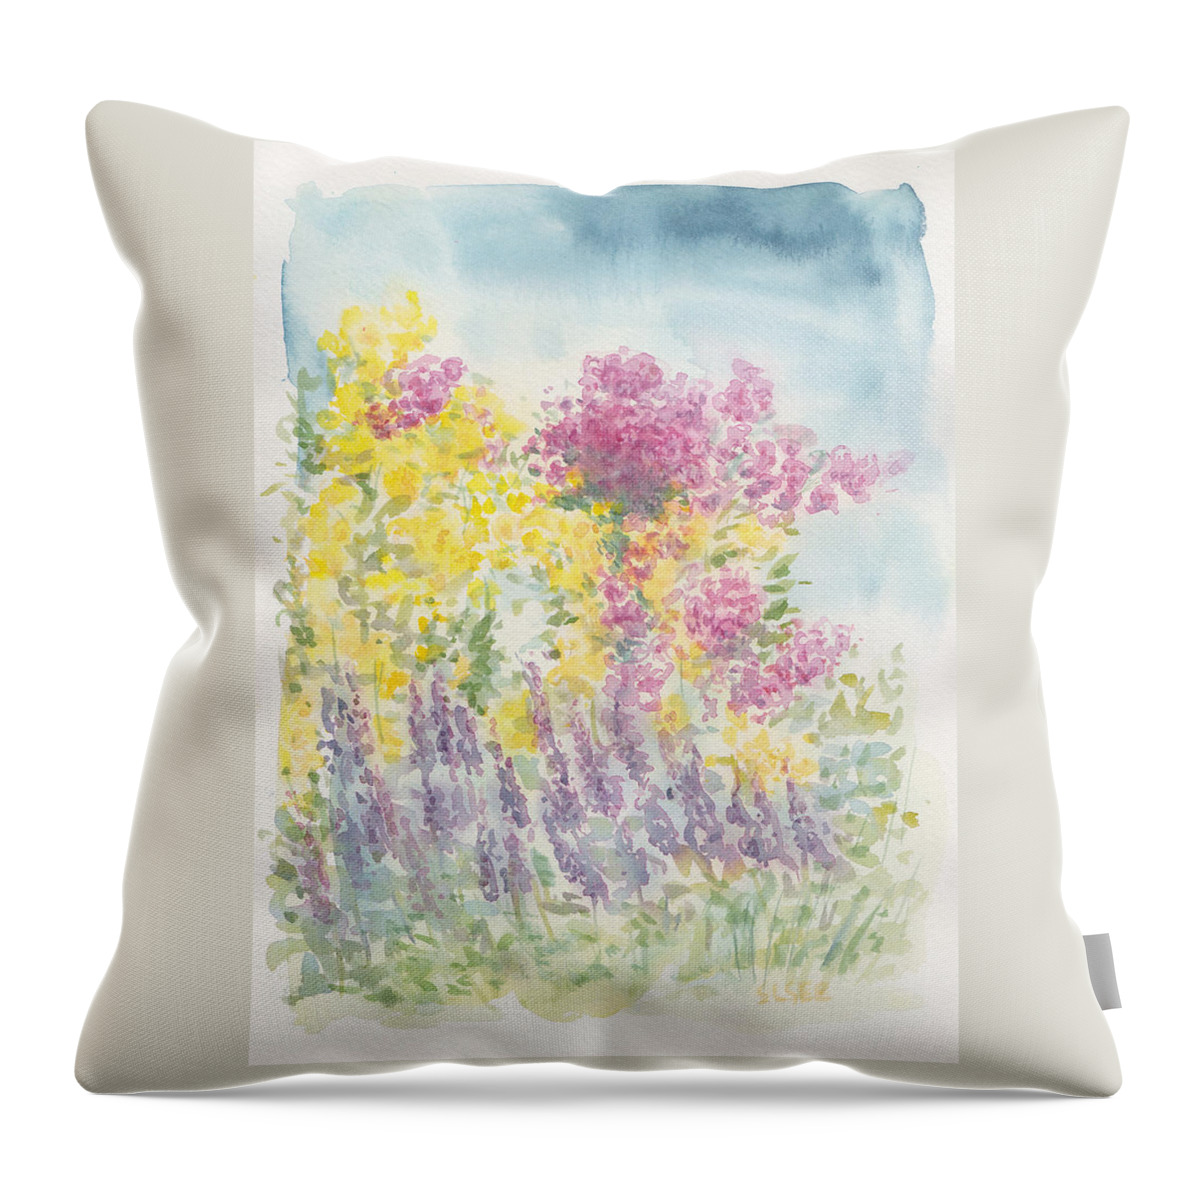 Watercolor Throw Pillow featuring the painting Spring Garden by Jane See